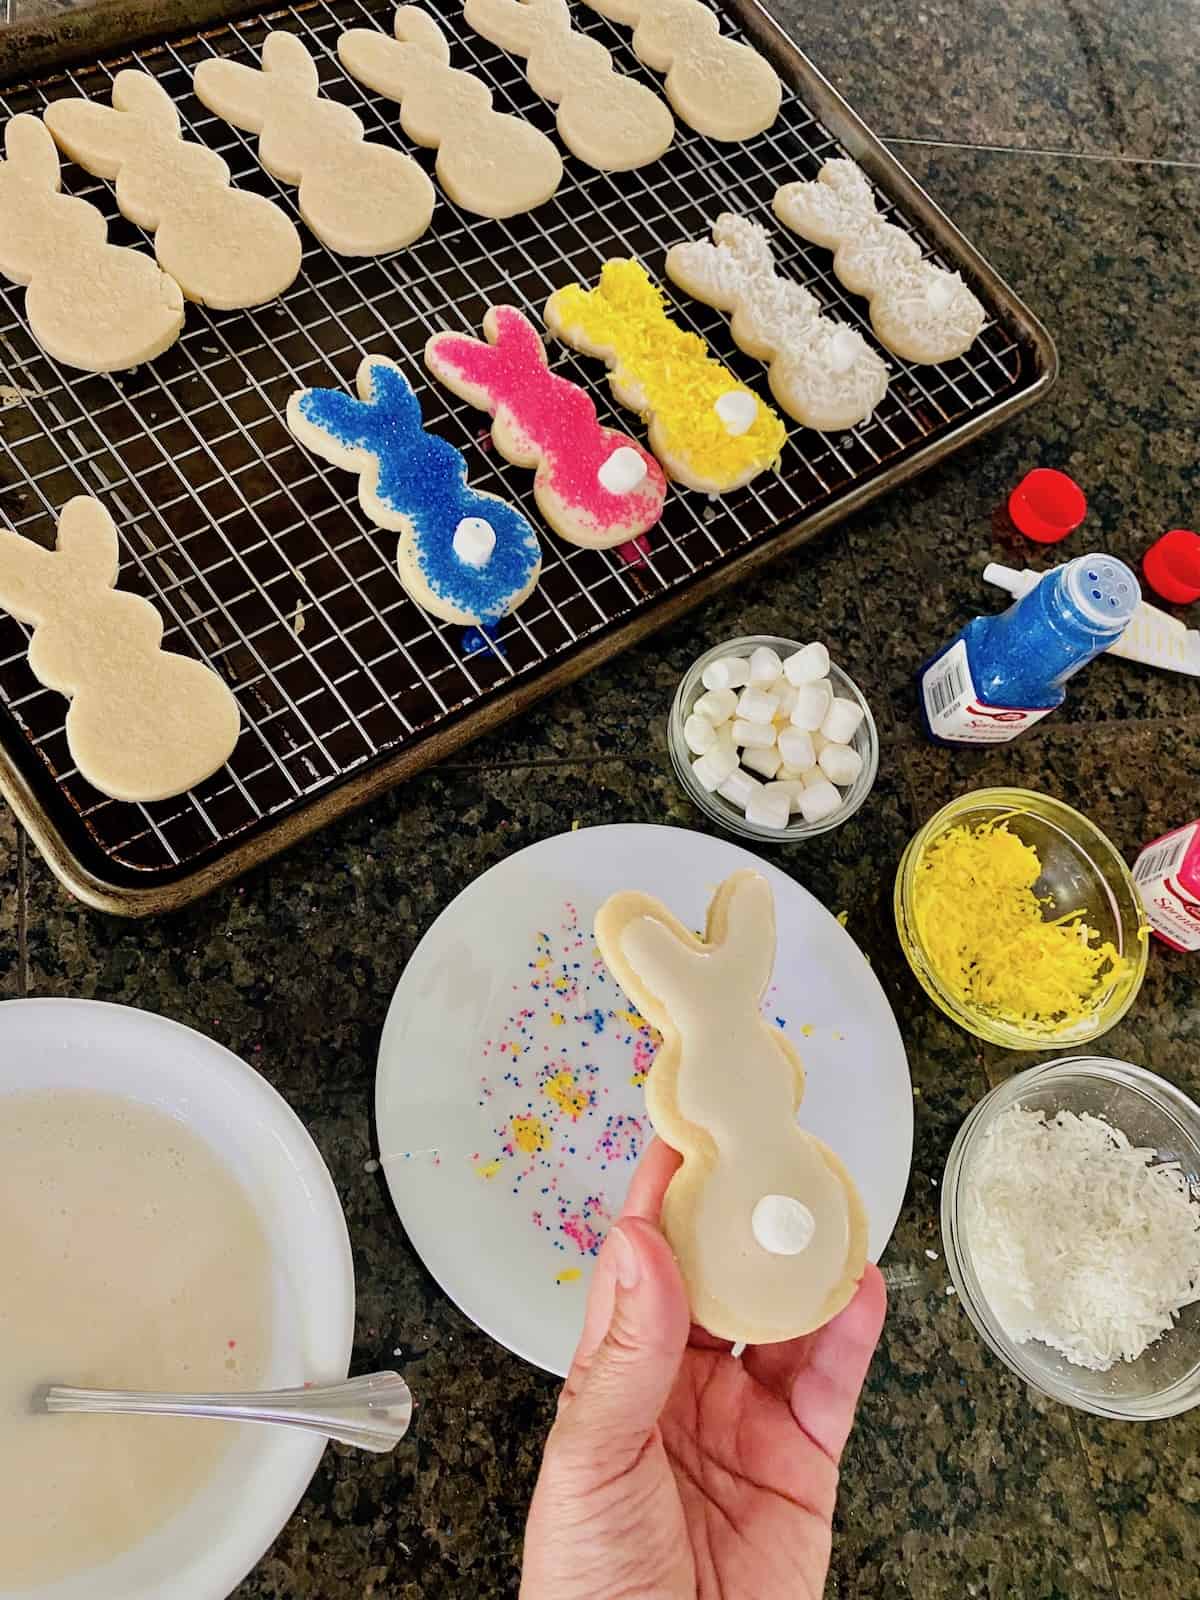 Baking sheet with some cookie plain and decorated plus hand holding a cooking with icing and a marshmallow as a bunny tail.